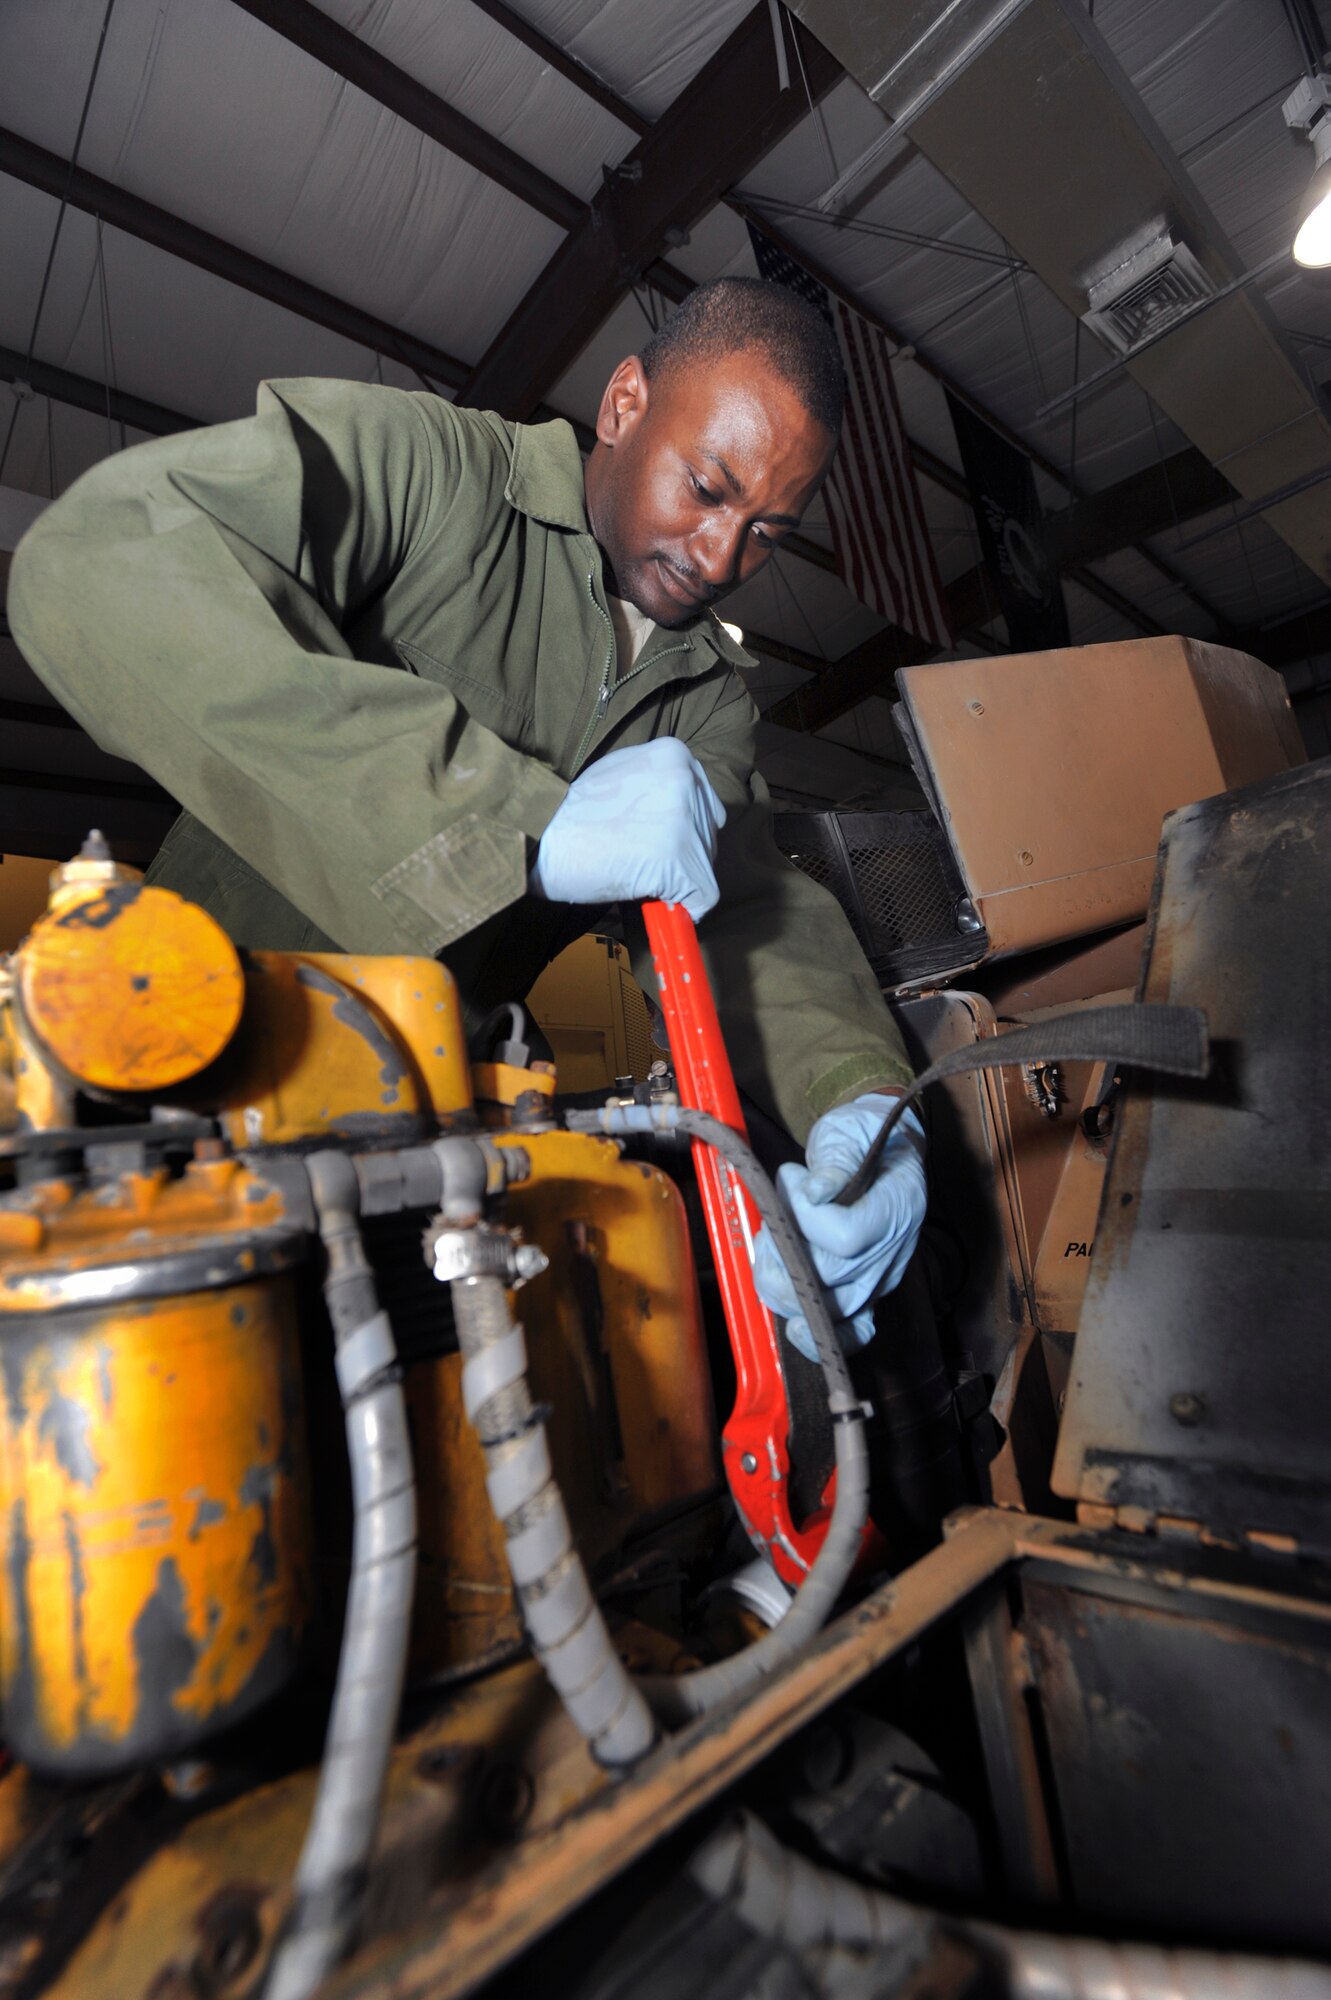 Senior Airman Mario Fortenberry, an Aircraft Ground Equipment mechanic with the 379th Expeditionary Maintenance Squadron, removes an oil filter on a B-1B Lancer bomb lift during its annual inspection, March 10, 2009, in an undisclosed location in Southwest Asia.  Airman Fortenberry and fellow AGE mechanics handle an inventory of over 550 pieces of equipment used to help service every aircraft on the base.  Airman Fortenberry is native to Baton Rouge La. and is deployed from Elmendorf Air Force Base, Alaska in support of Operations Iraqi and Enduring Freedom and Combined Joint Task Force - Horn of Africa.  (U.S. Air Force Photo by Staff Sgt. Joshua Garcia/released)